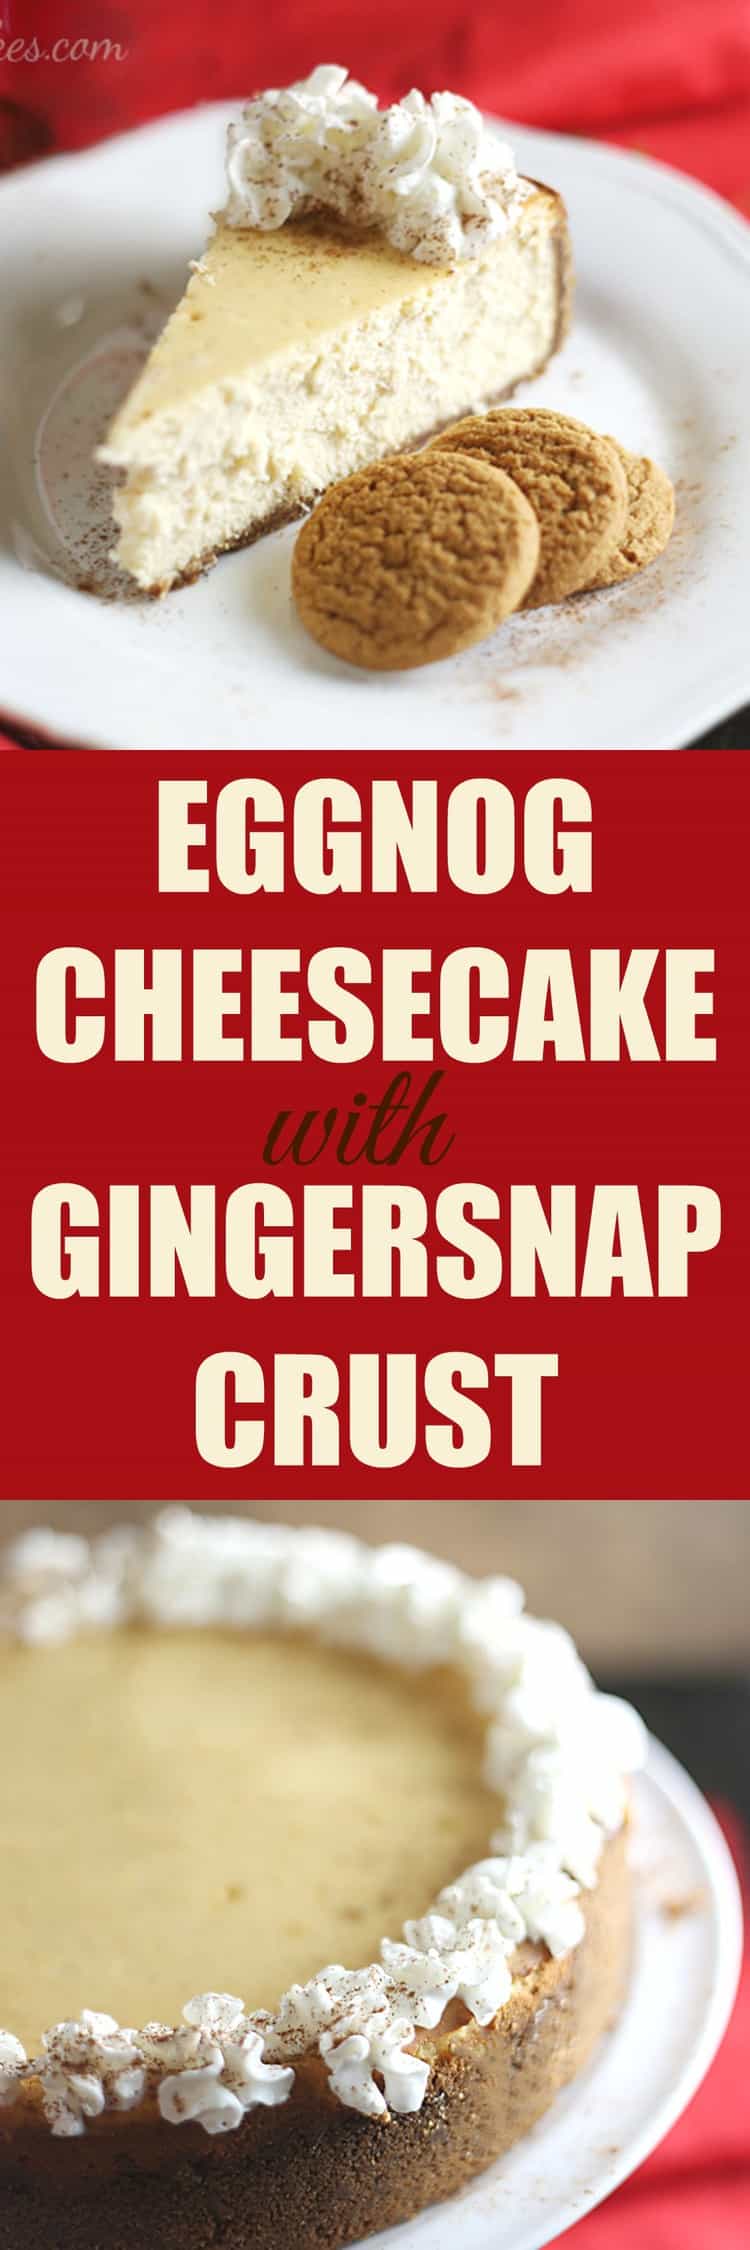 Eggnog Cheesecake with Gingersnap Crust by Rose Bakes #SharetheJoy #ad